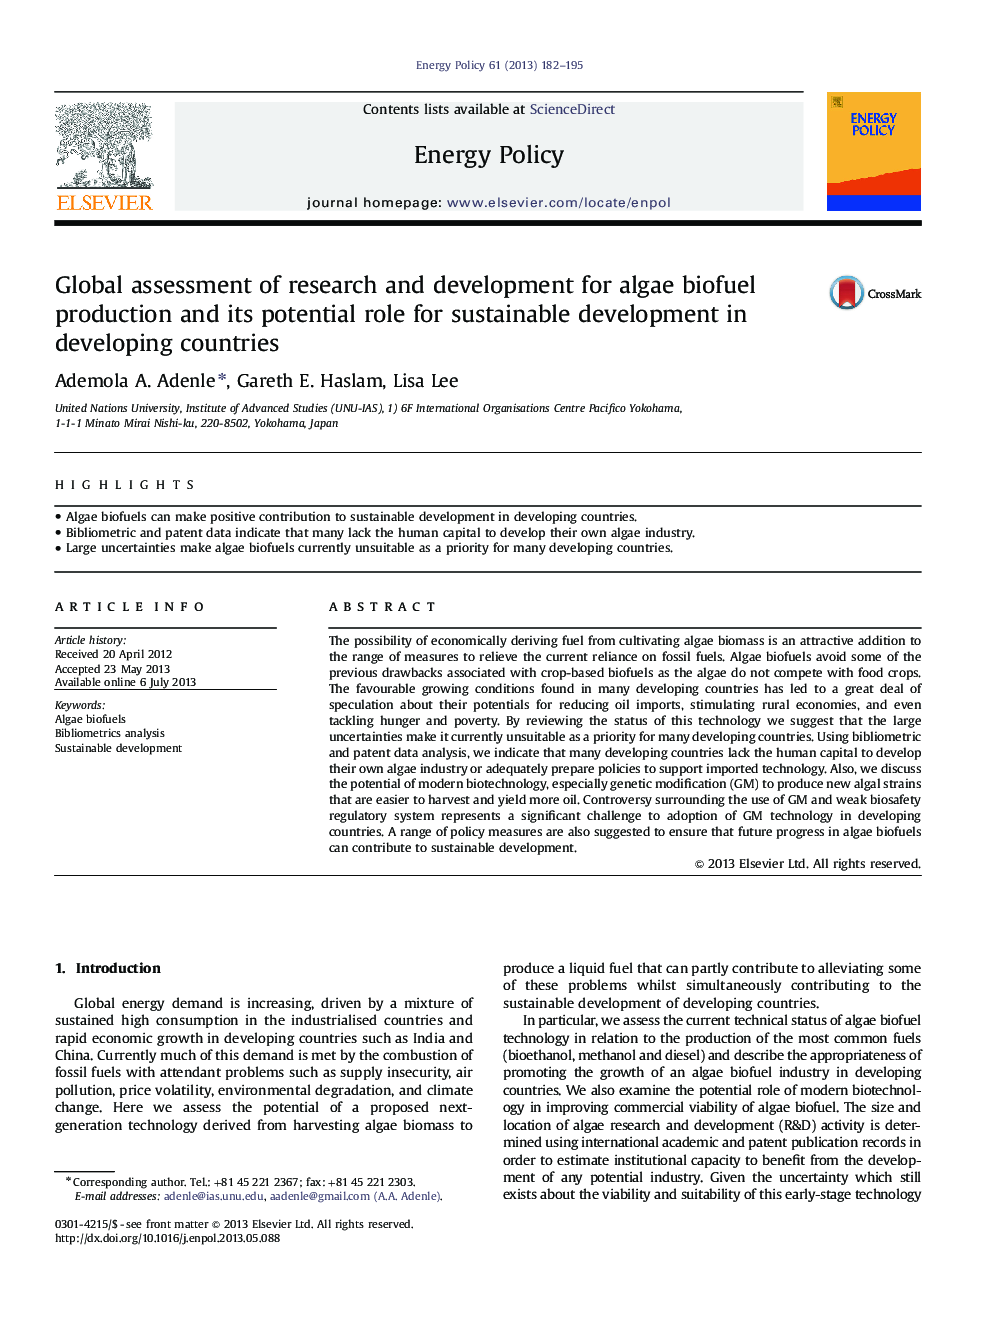 Global assessment of research and development for algae biofuel production and its potential role for sustainable development in developing countries